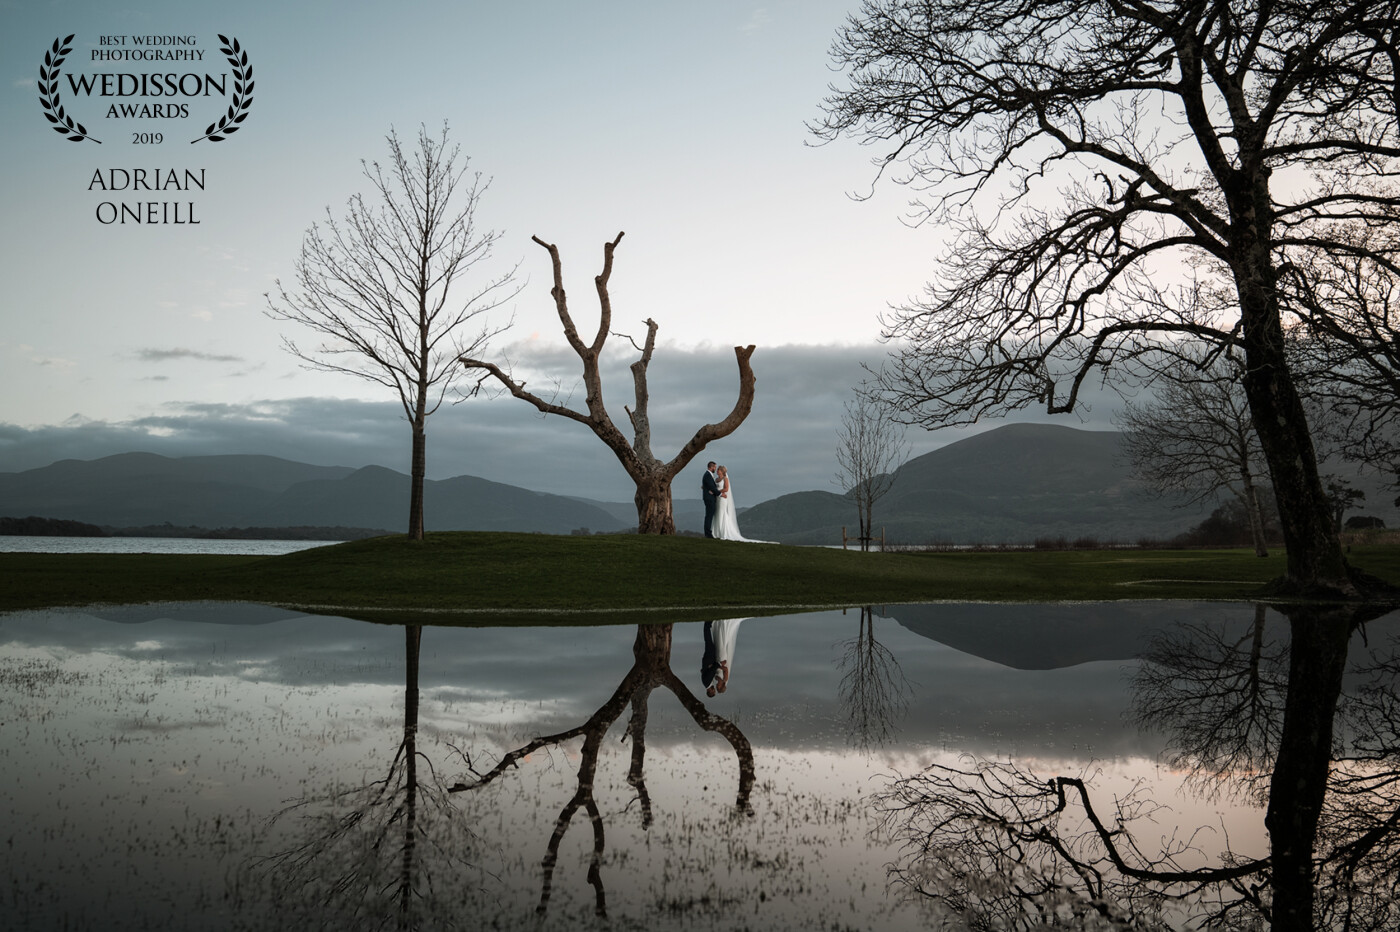 It was the day after a Storm and there were floods everywhere. I took full advantage and placed the couple in the perfect place so I could get a lovely reflection in the puddle. The reflection of the old tree just leads you to the couple, I love it!!!!